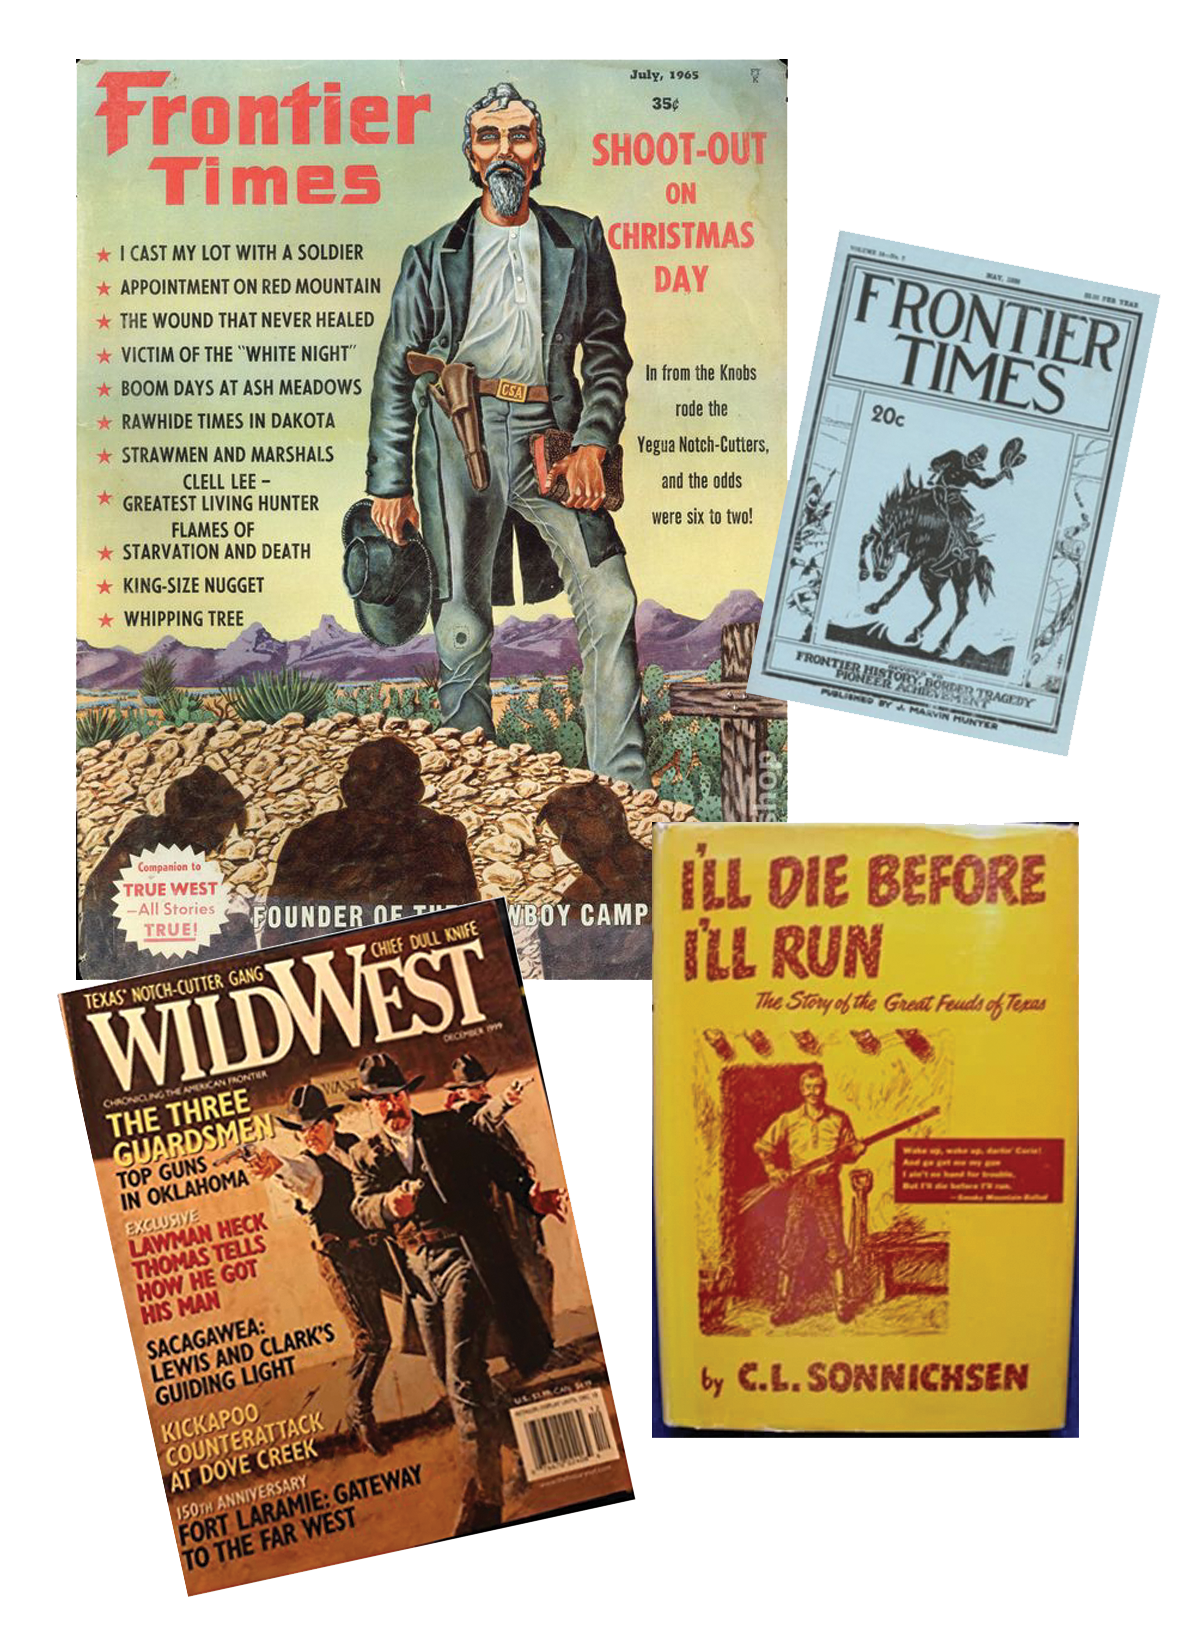 Magazines and books about the 1883 shootout in McDade